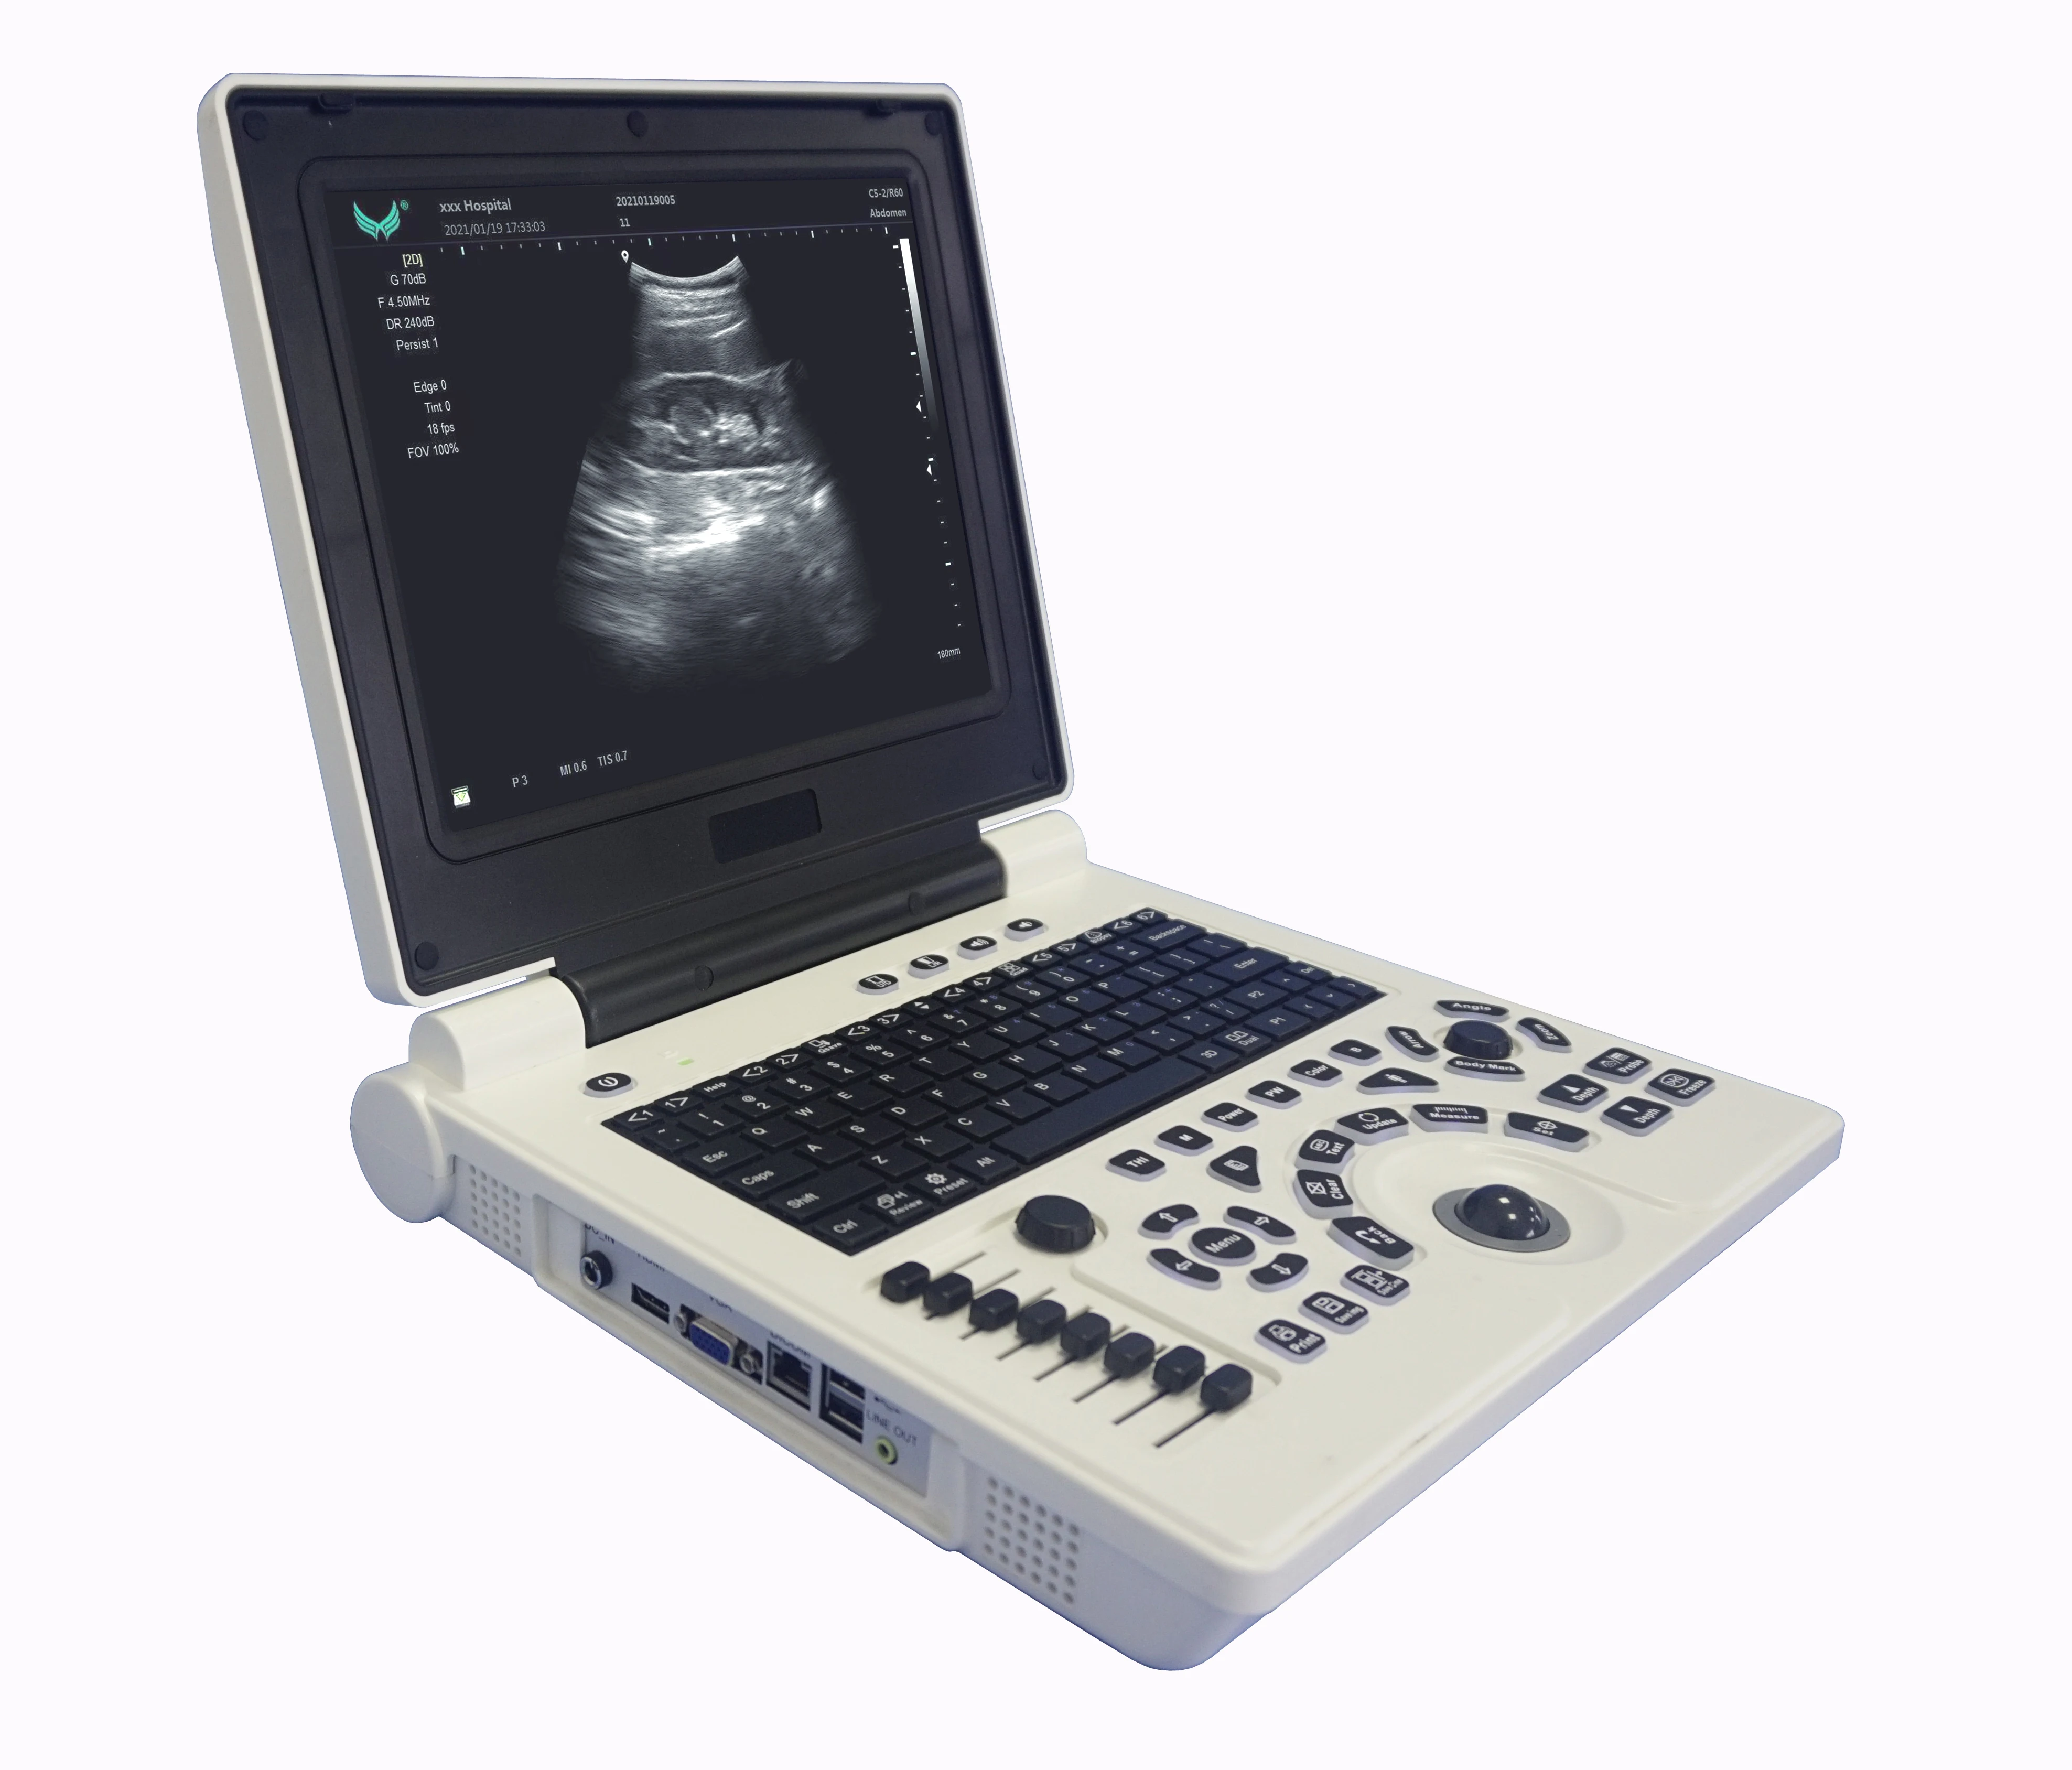 

new arrival P20 PW black and white ultrasound scanner supports convex,transvaginal,linear and micro convex